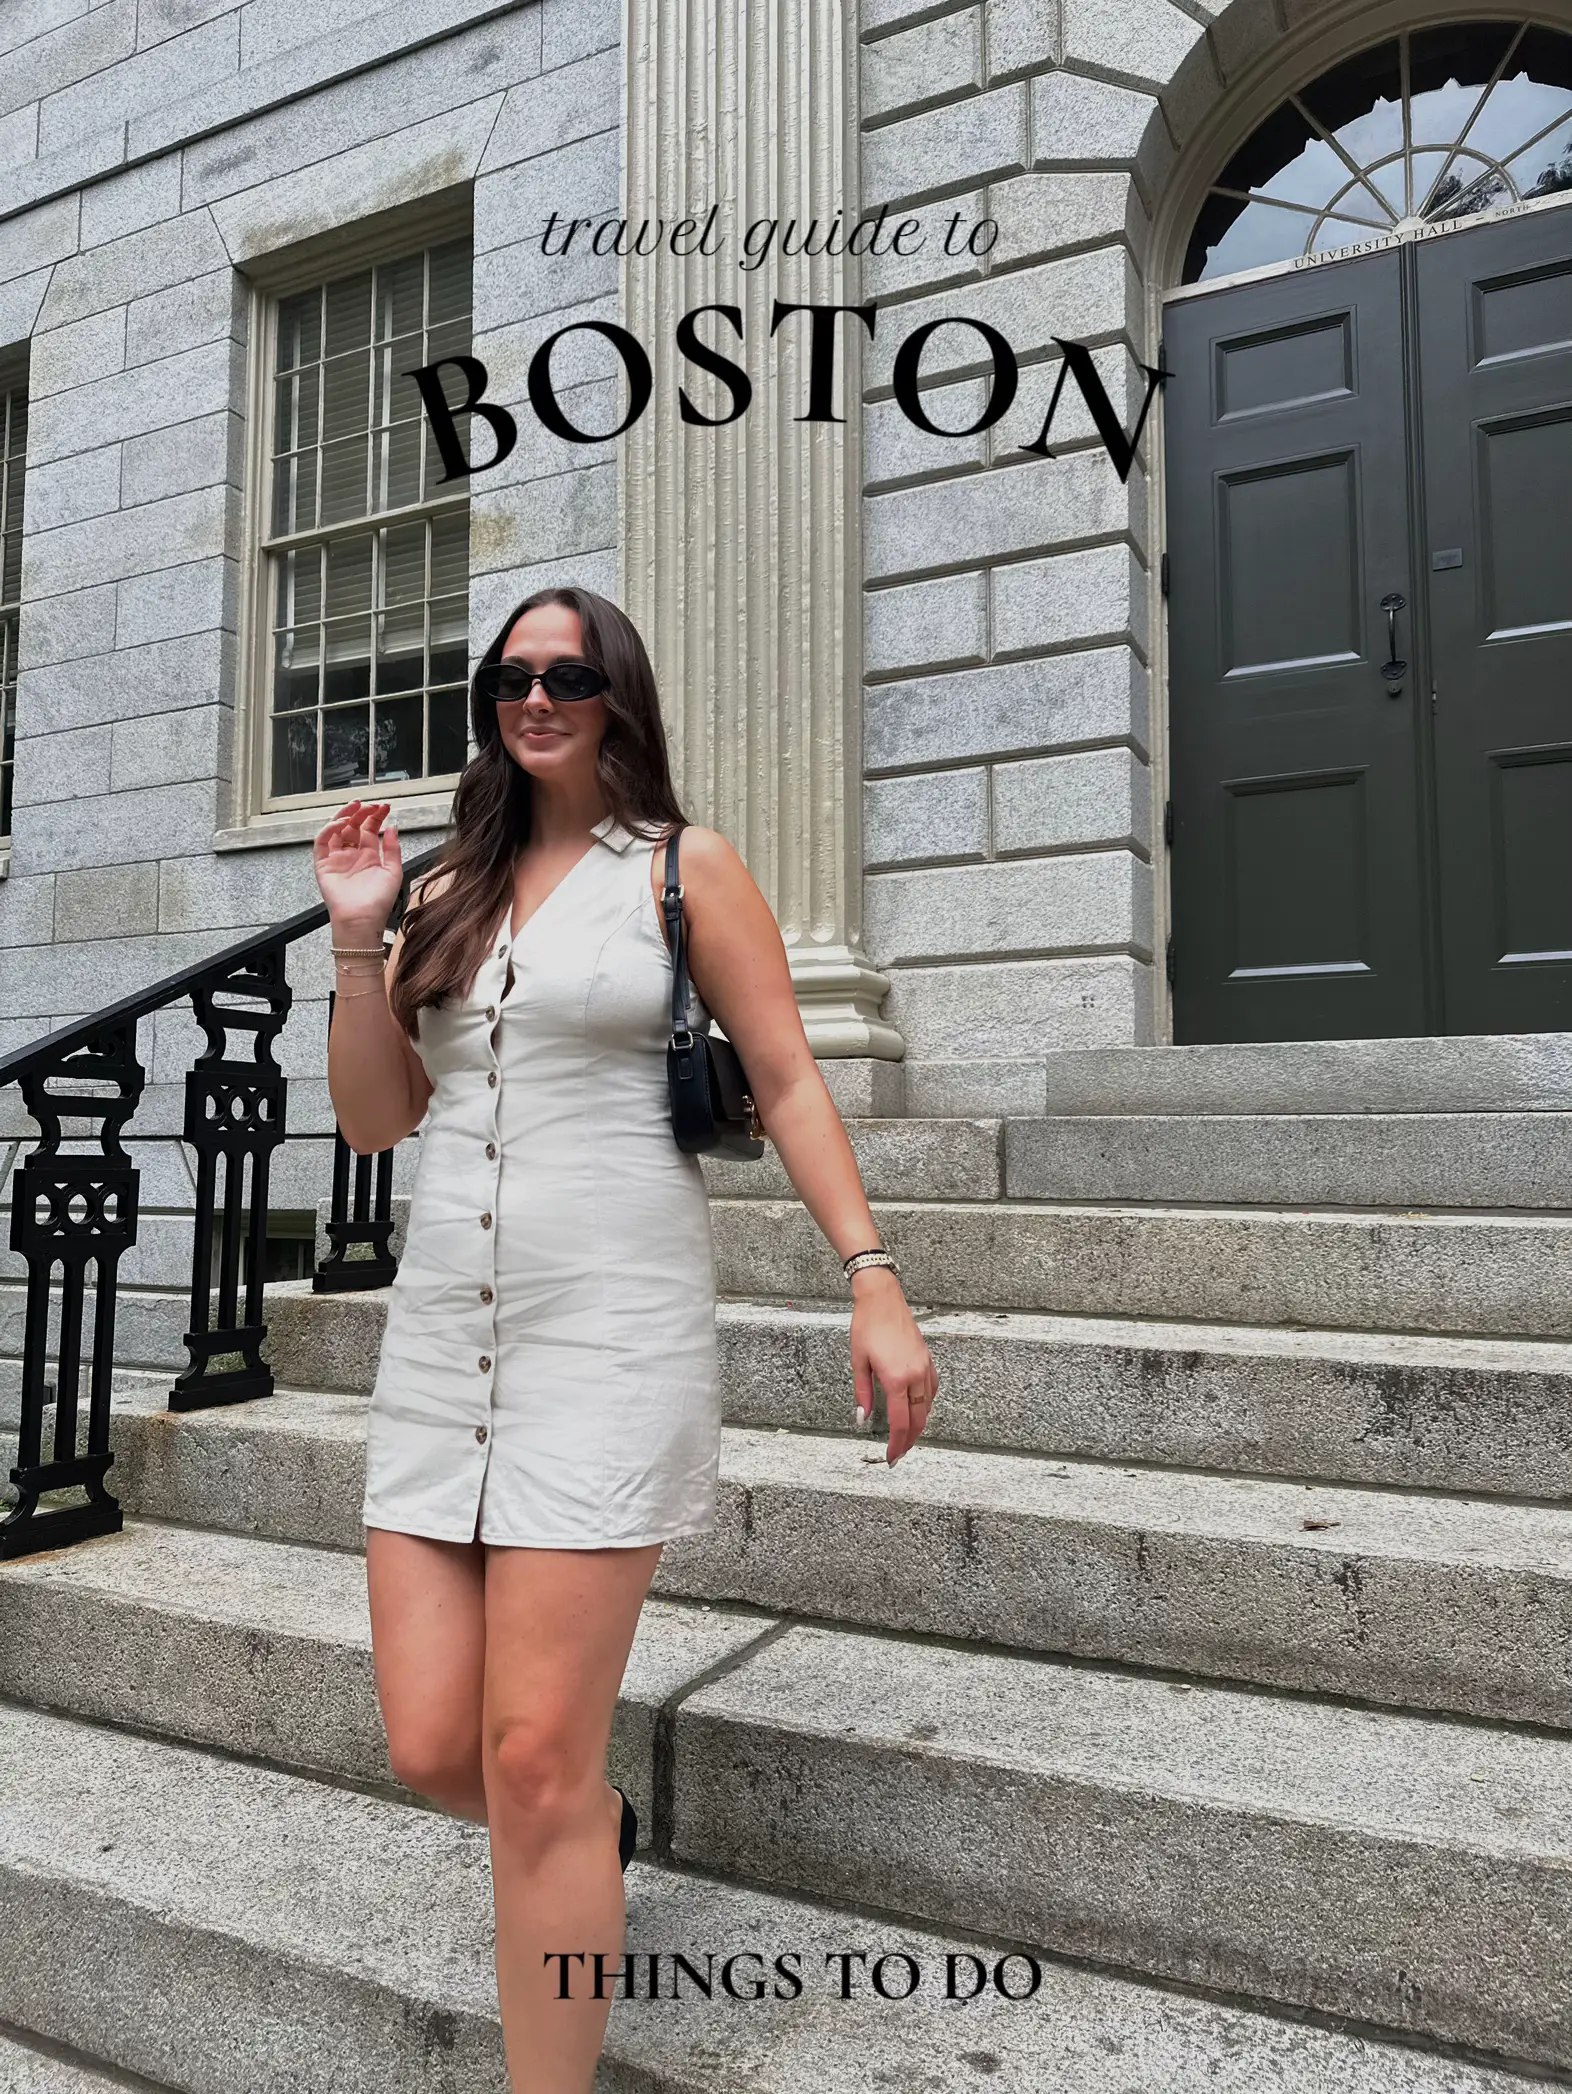 A DAY IN BOSTON 🦞's images